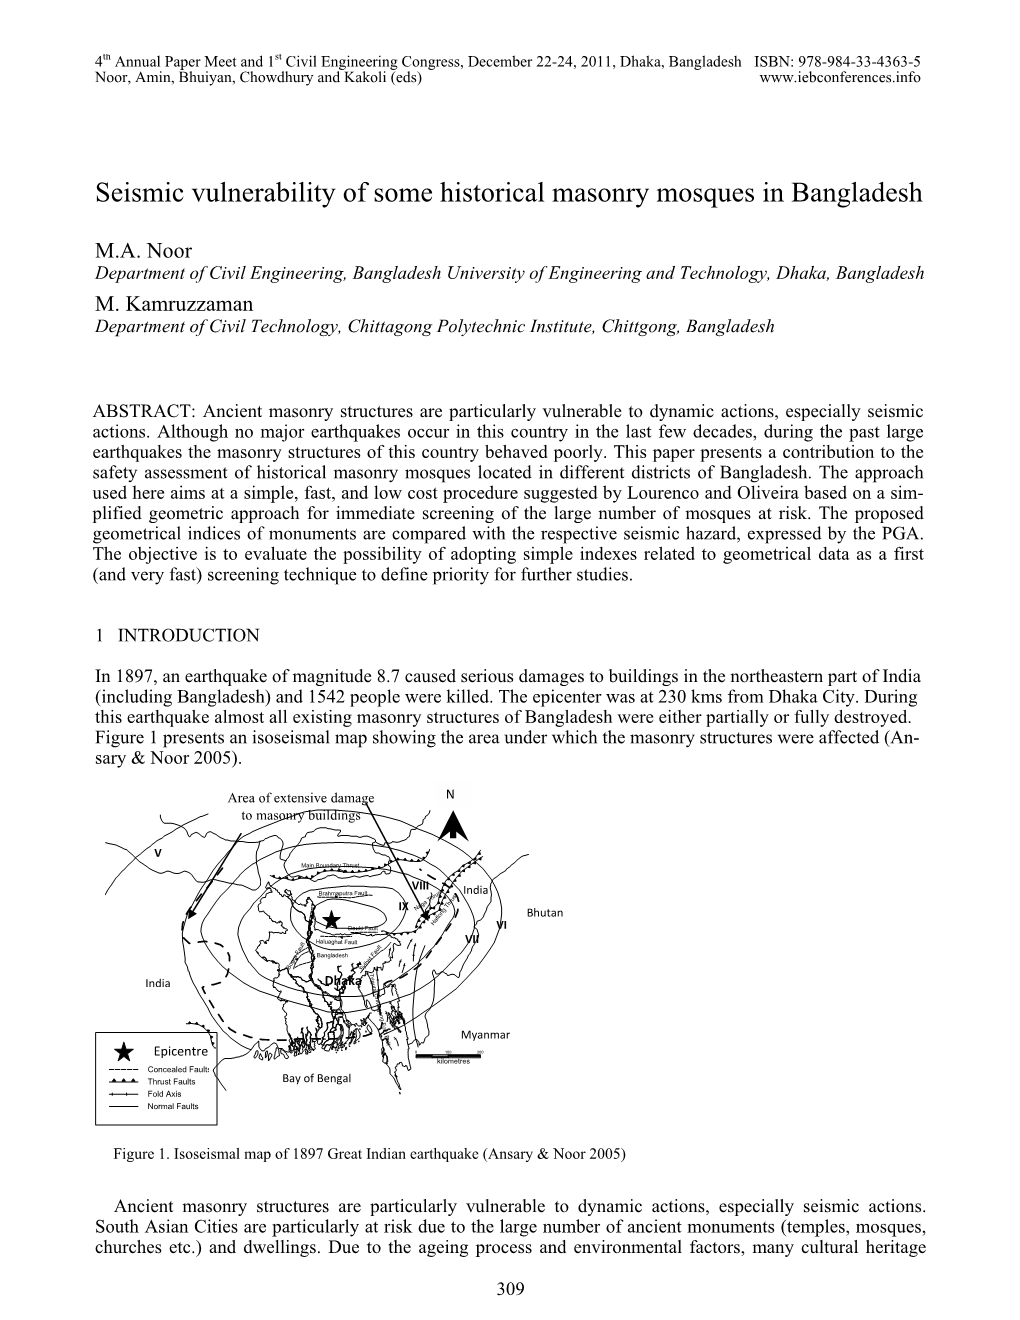 Seismic Vulnerability of Some Historical Masonry Mosques in Bangladesh